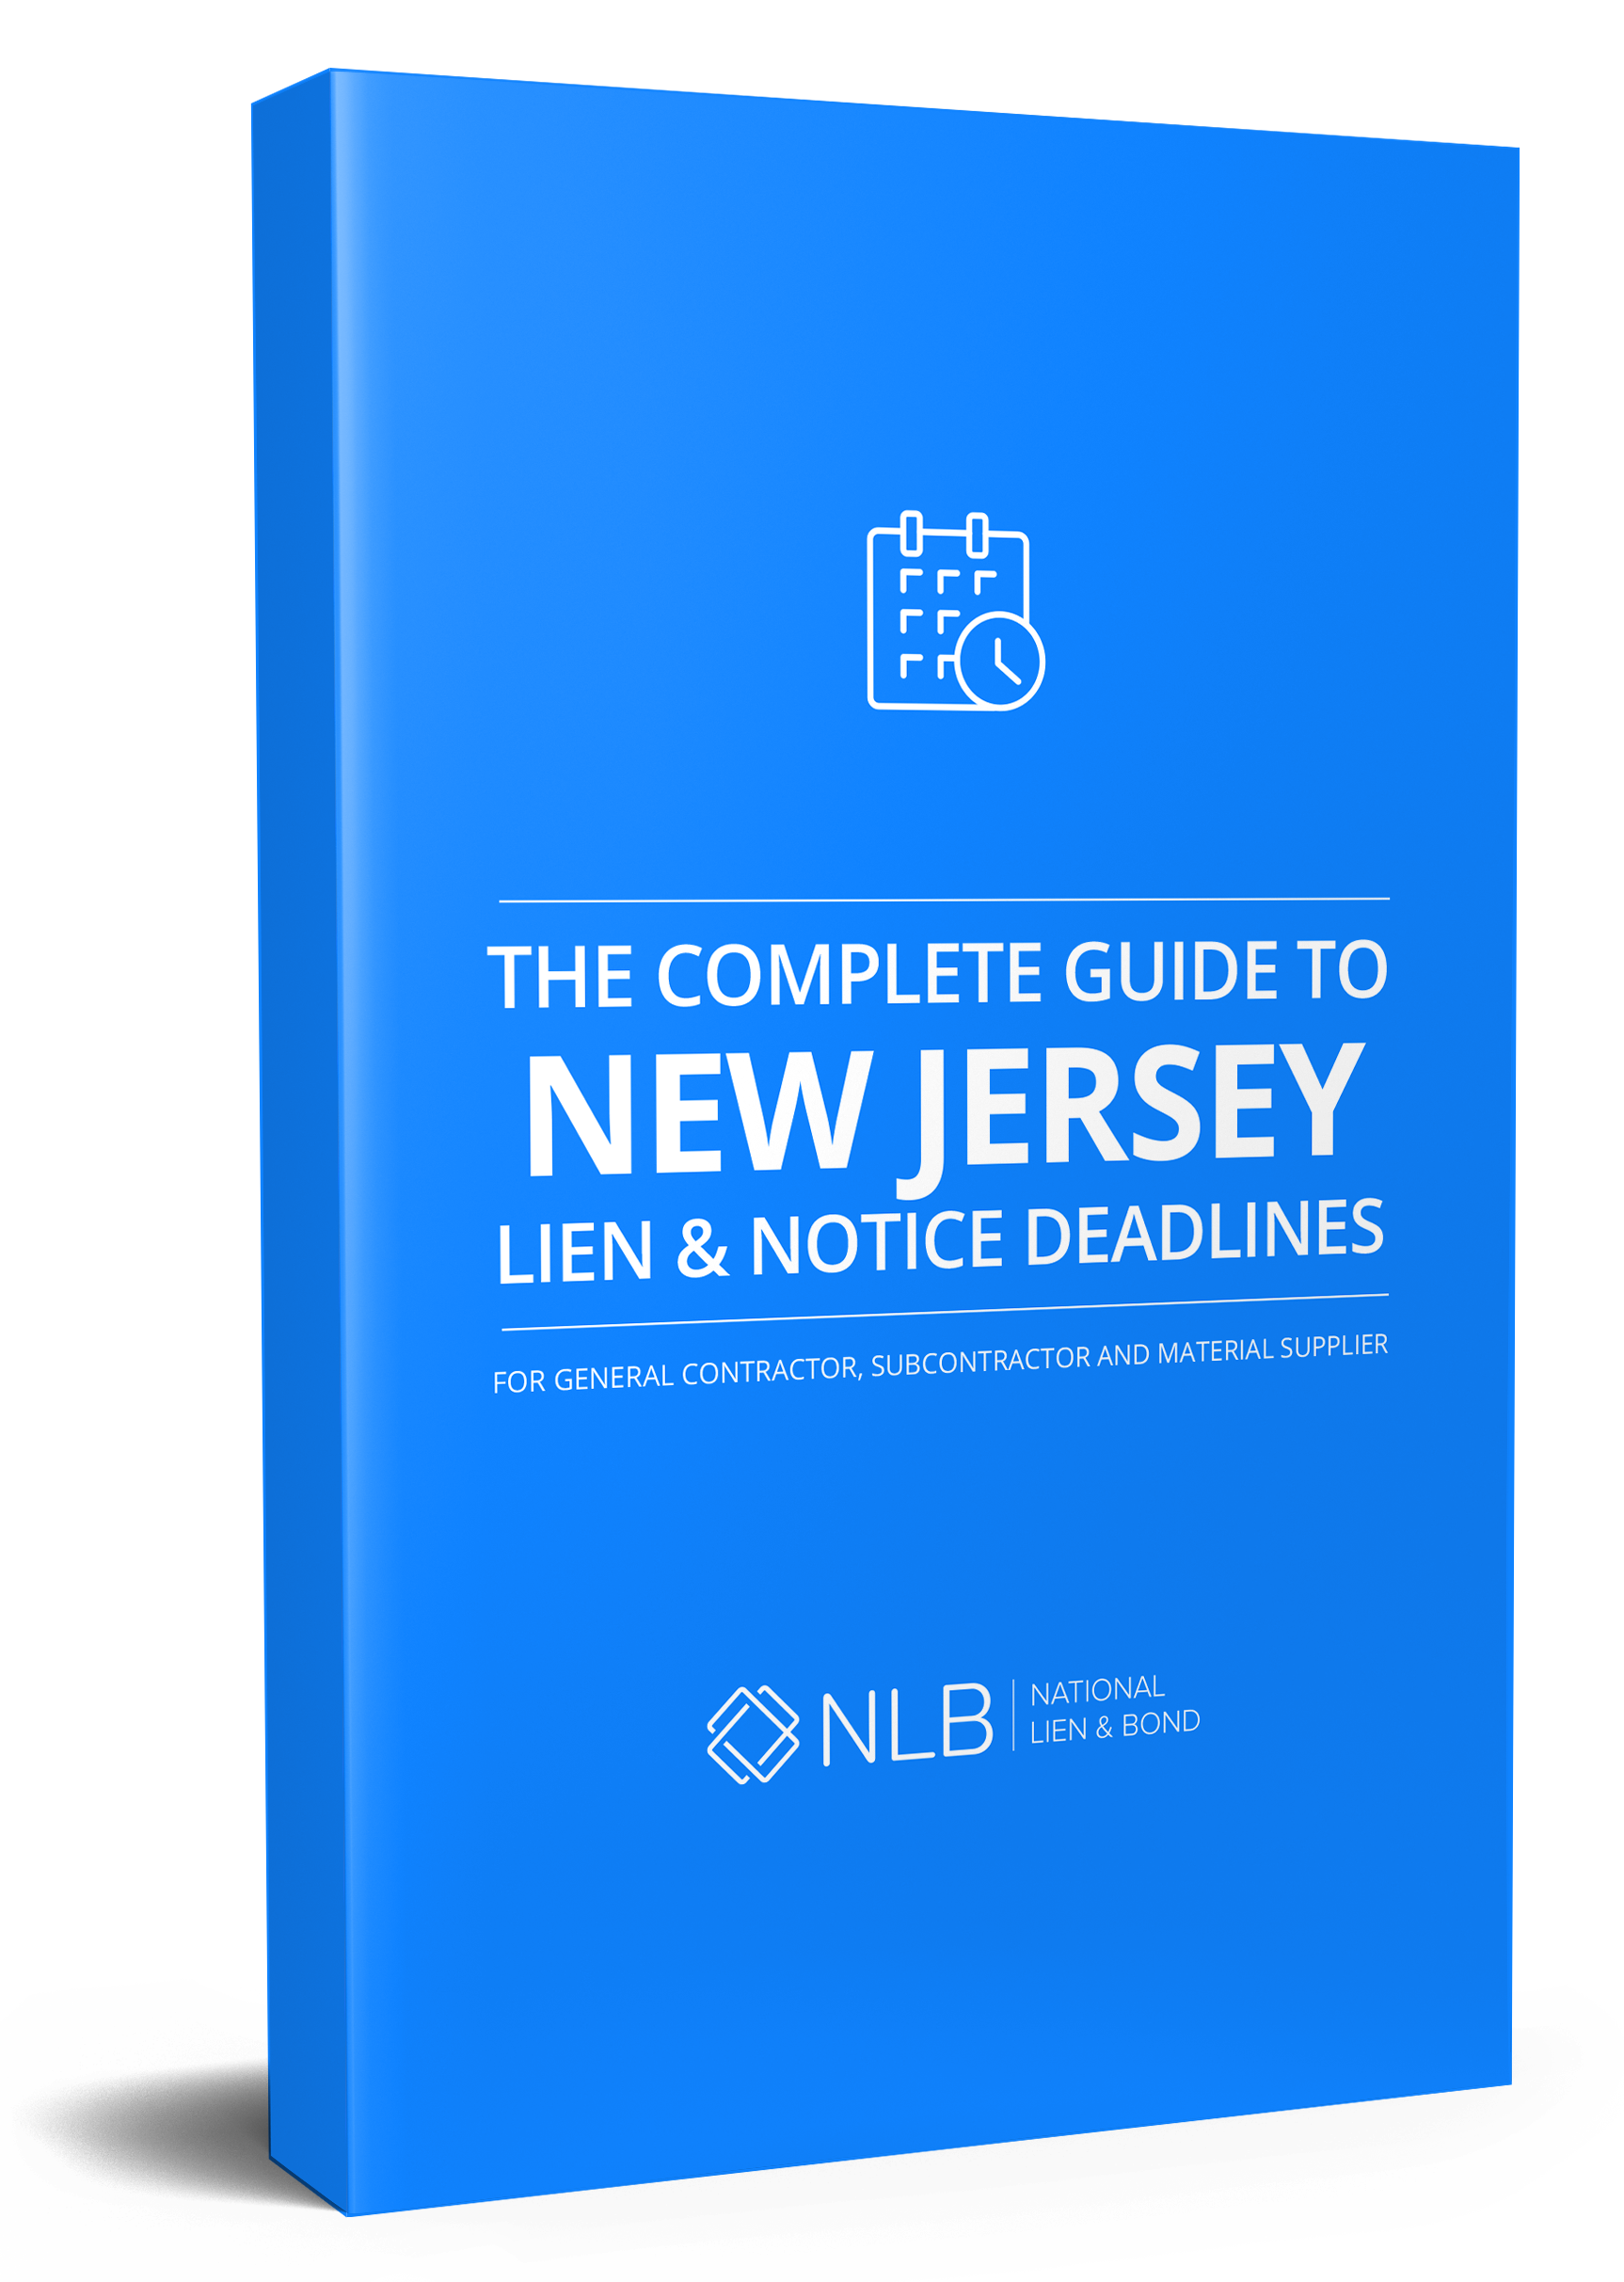 Download The Complete Guide to New Jersey Lien & Notice Deadlines ...